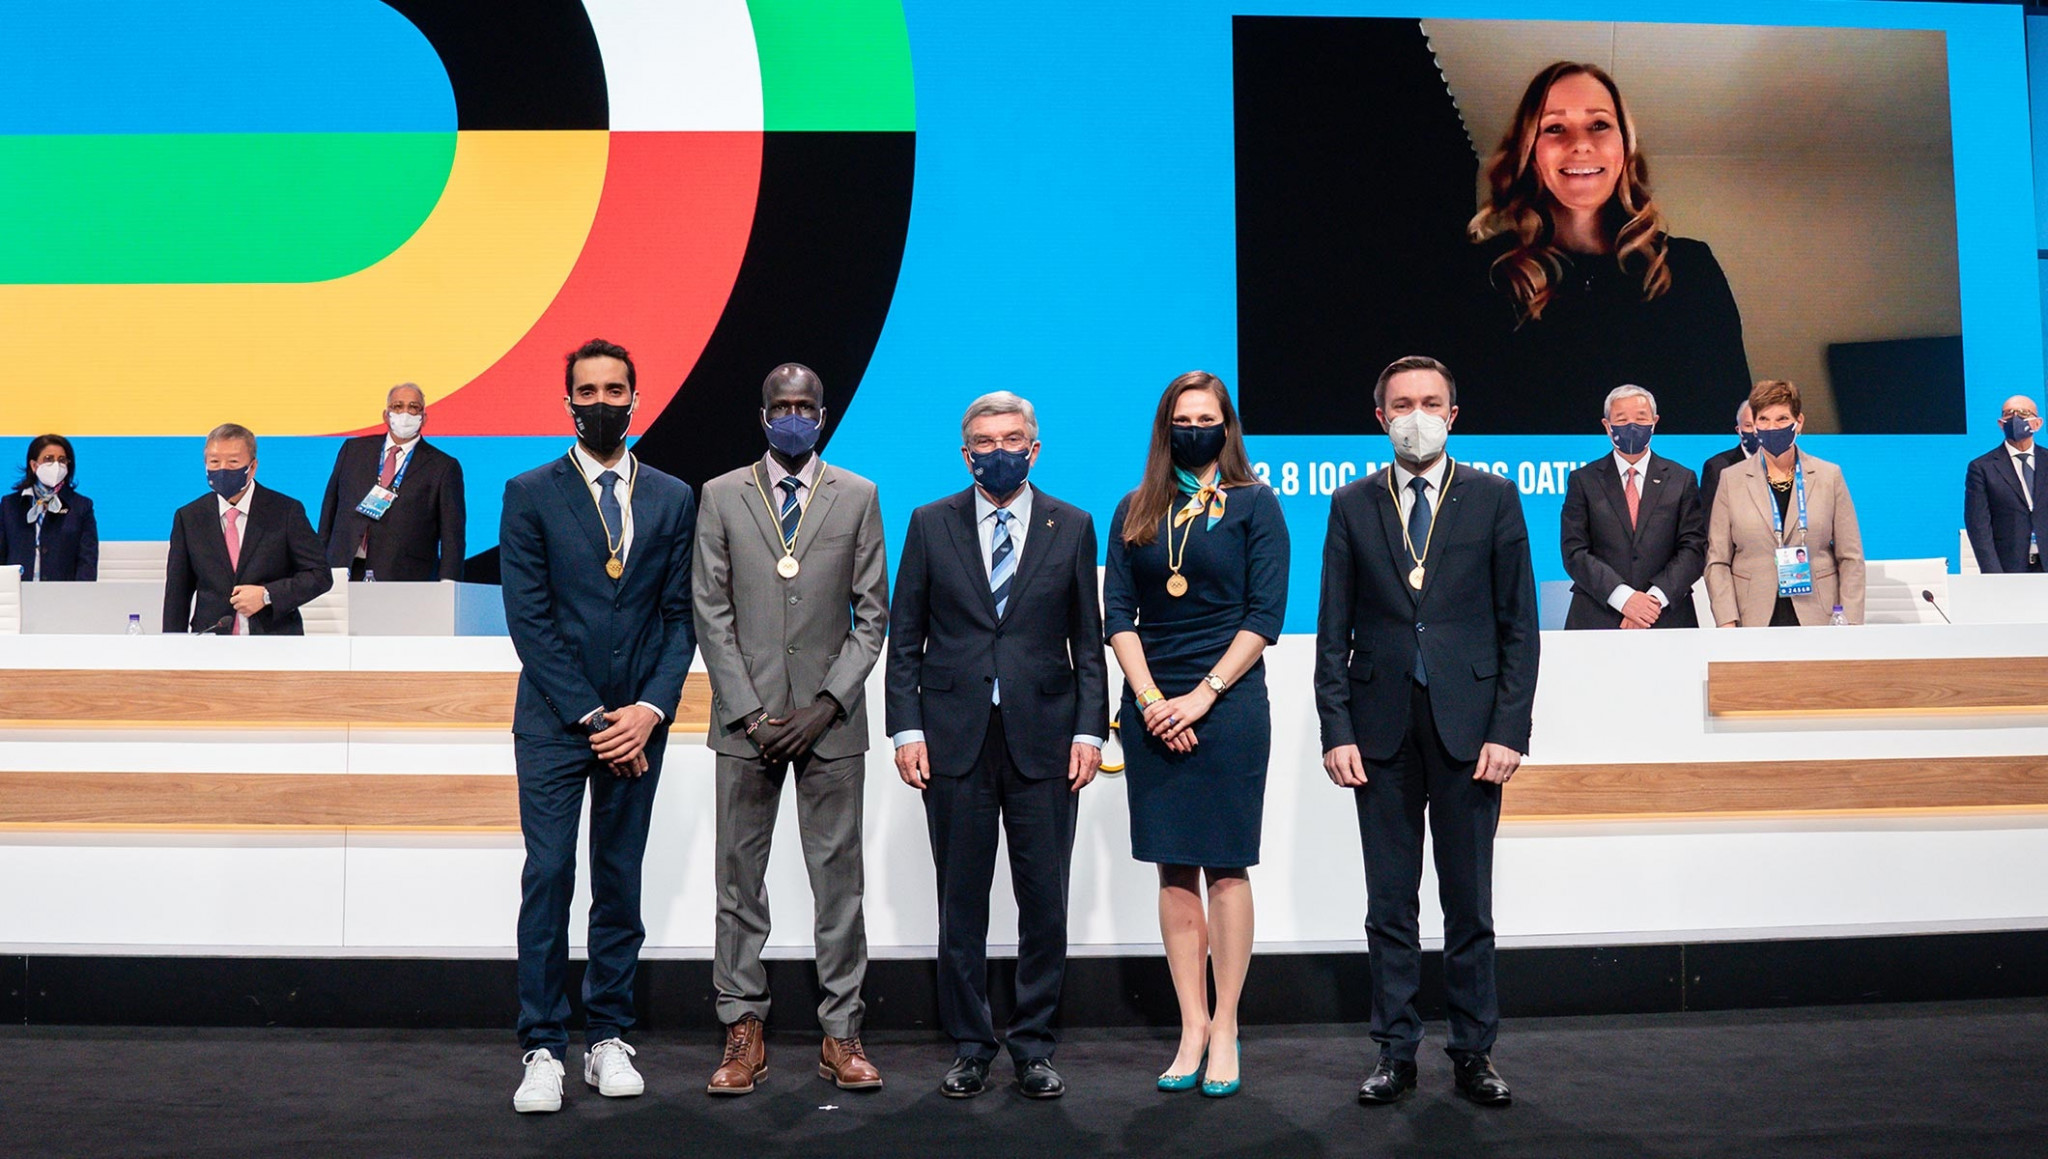 IOC President Thomas Bach welcomes Martin Fourcade, Yiech Pur Biel, Danka Barteková and David Lappartient as new IOC members with Frida Hansdotter joining remotely ©IOC